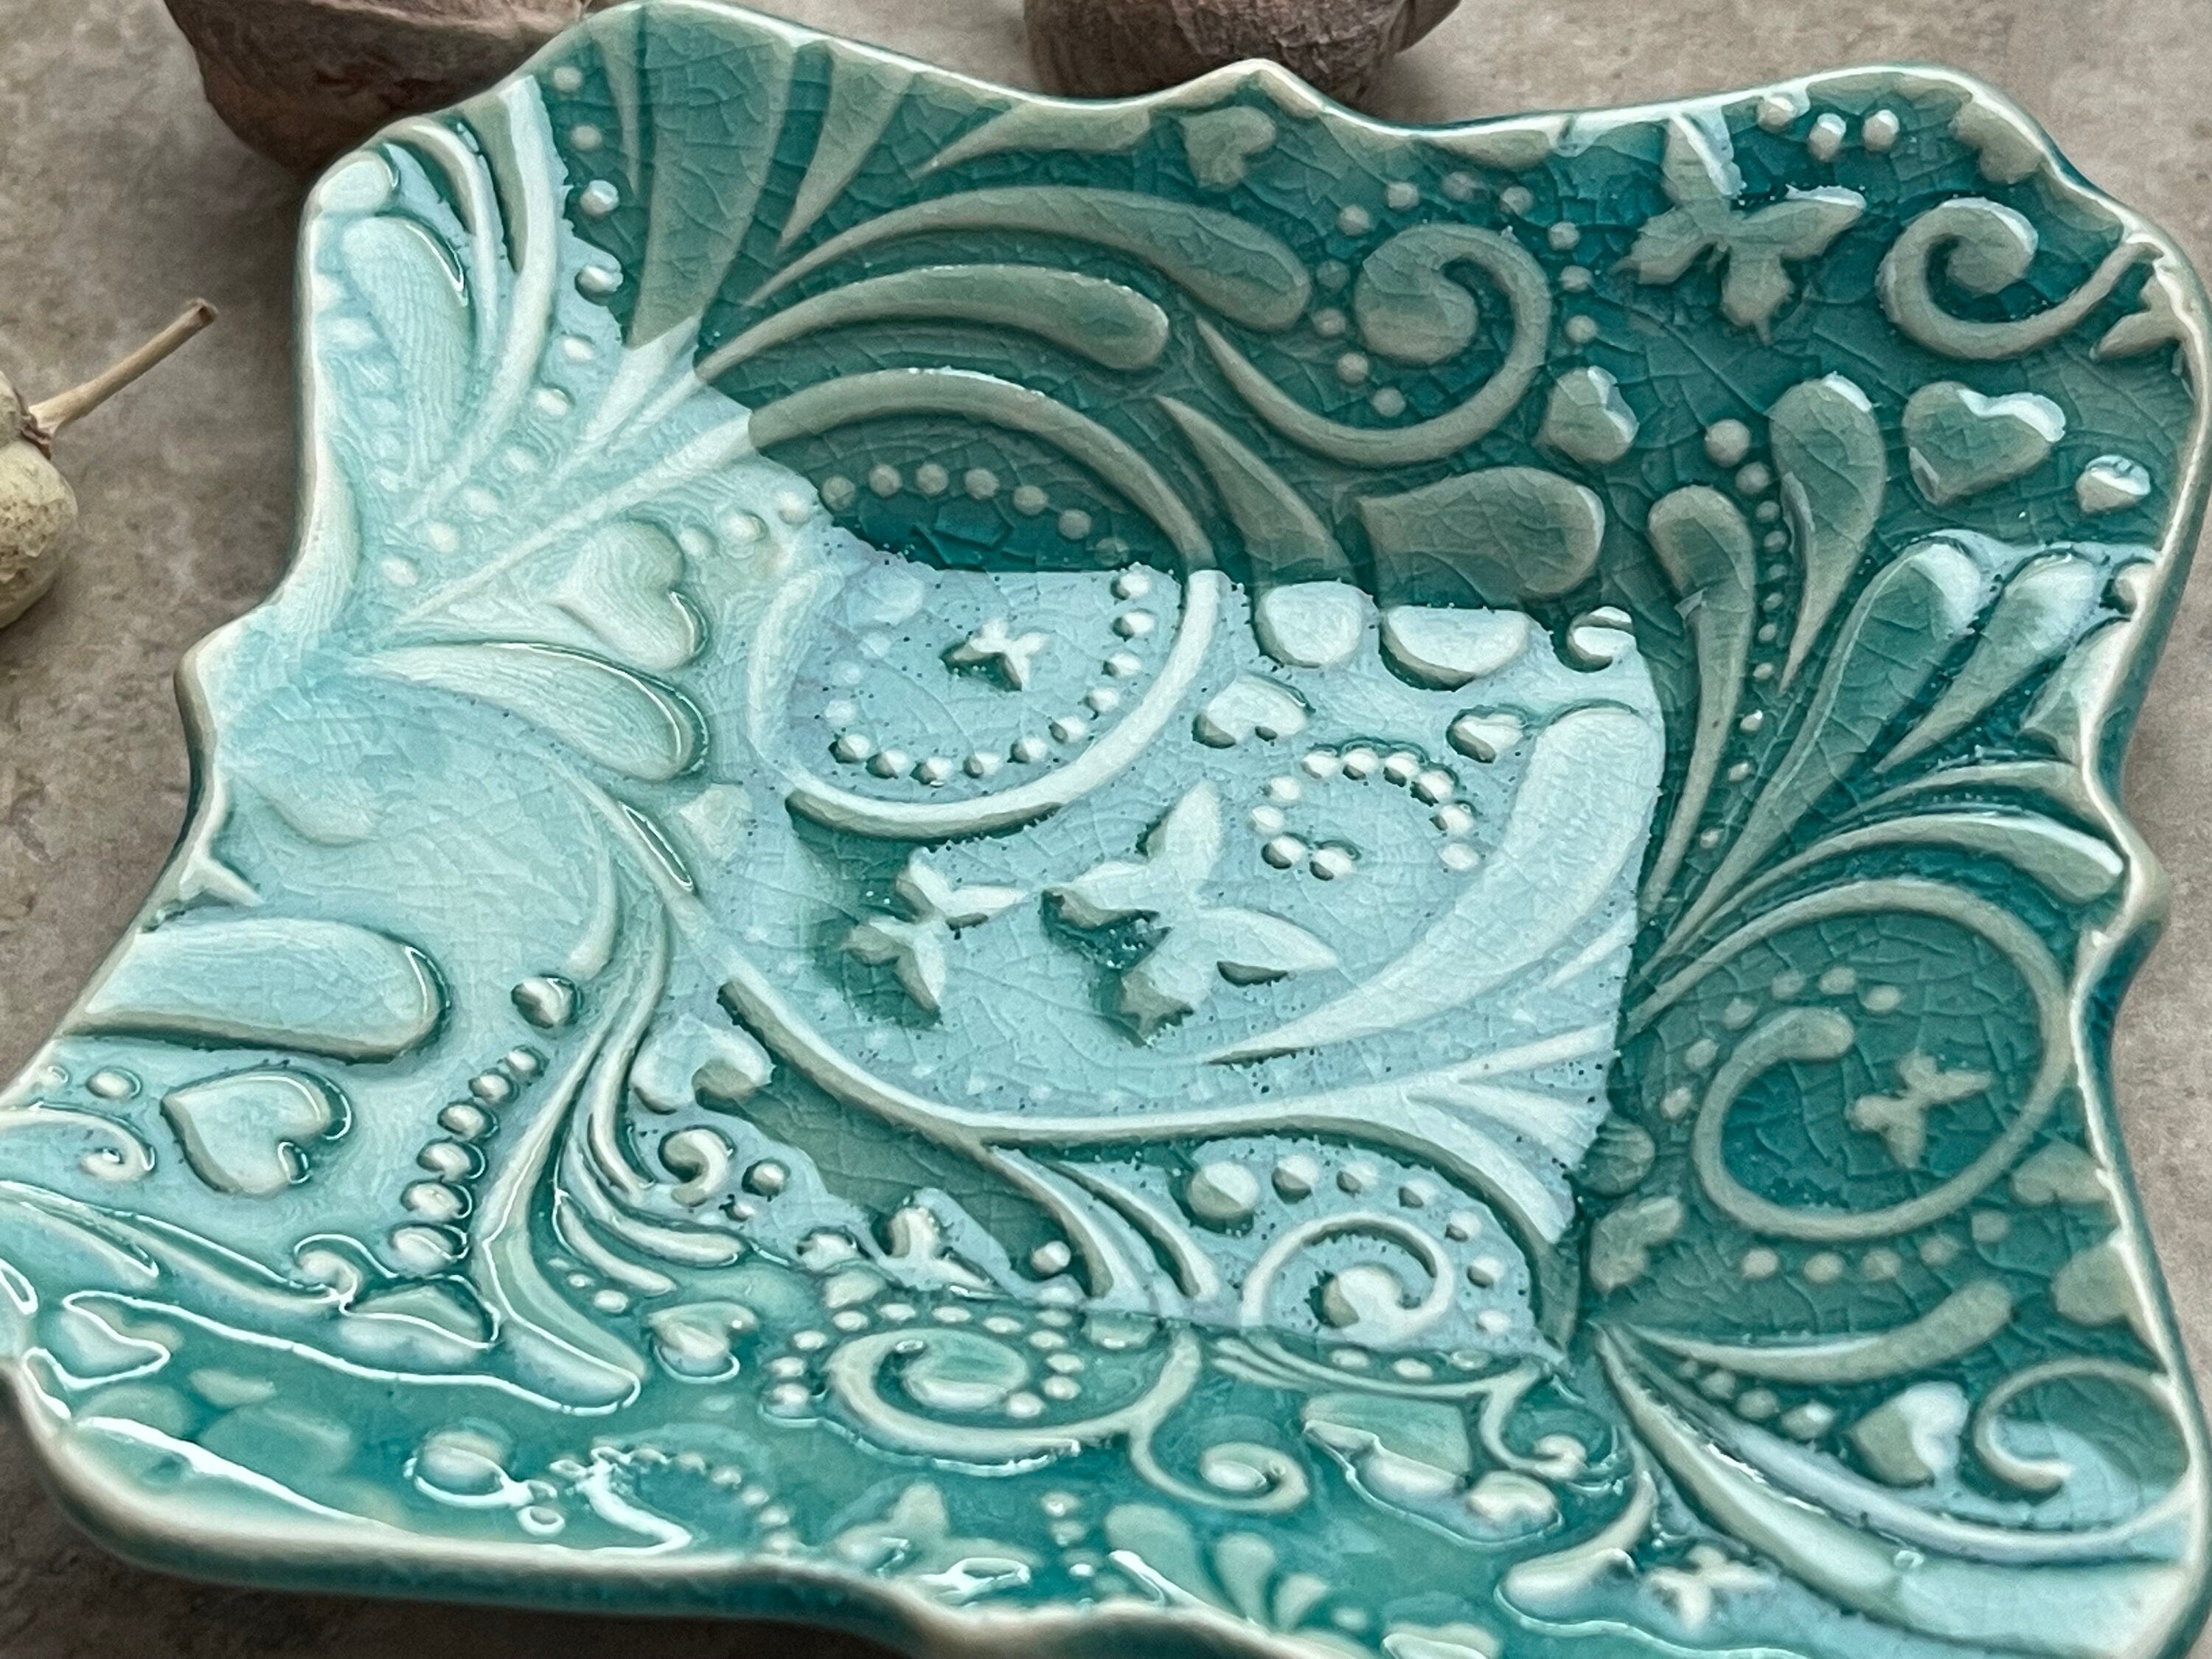 Womens Jewelry Storage, Turquoise Ring Dish, Butterflies and Hearts, Contemporary Trinket Tray, Porcelain Tray